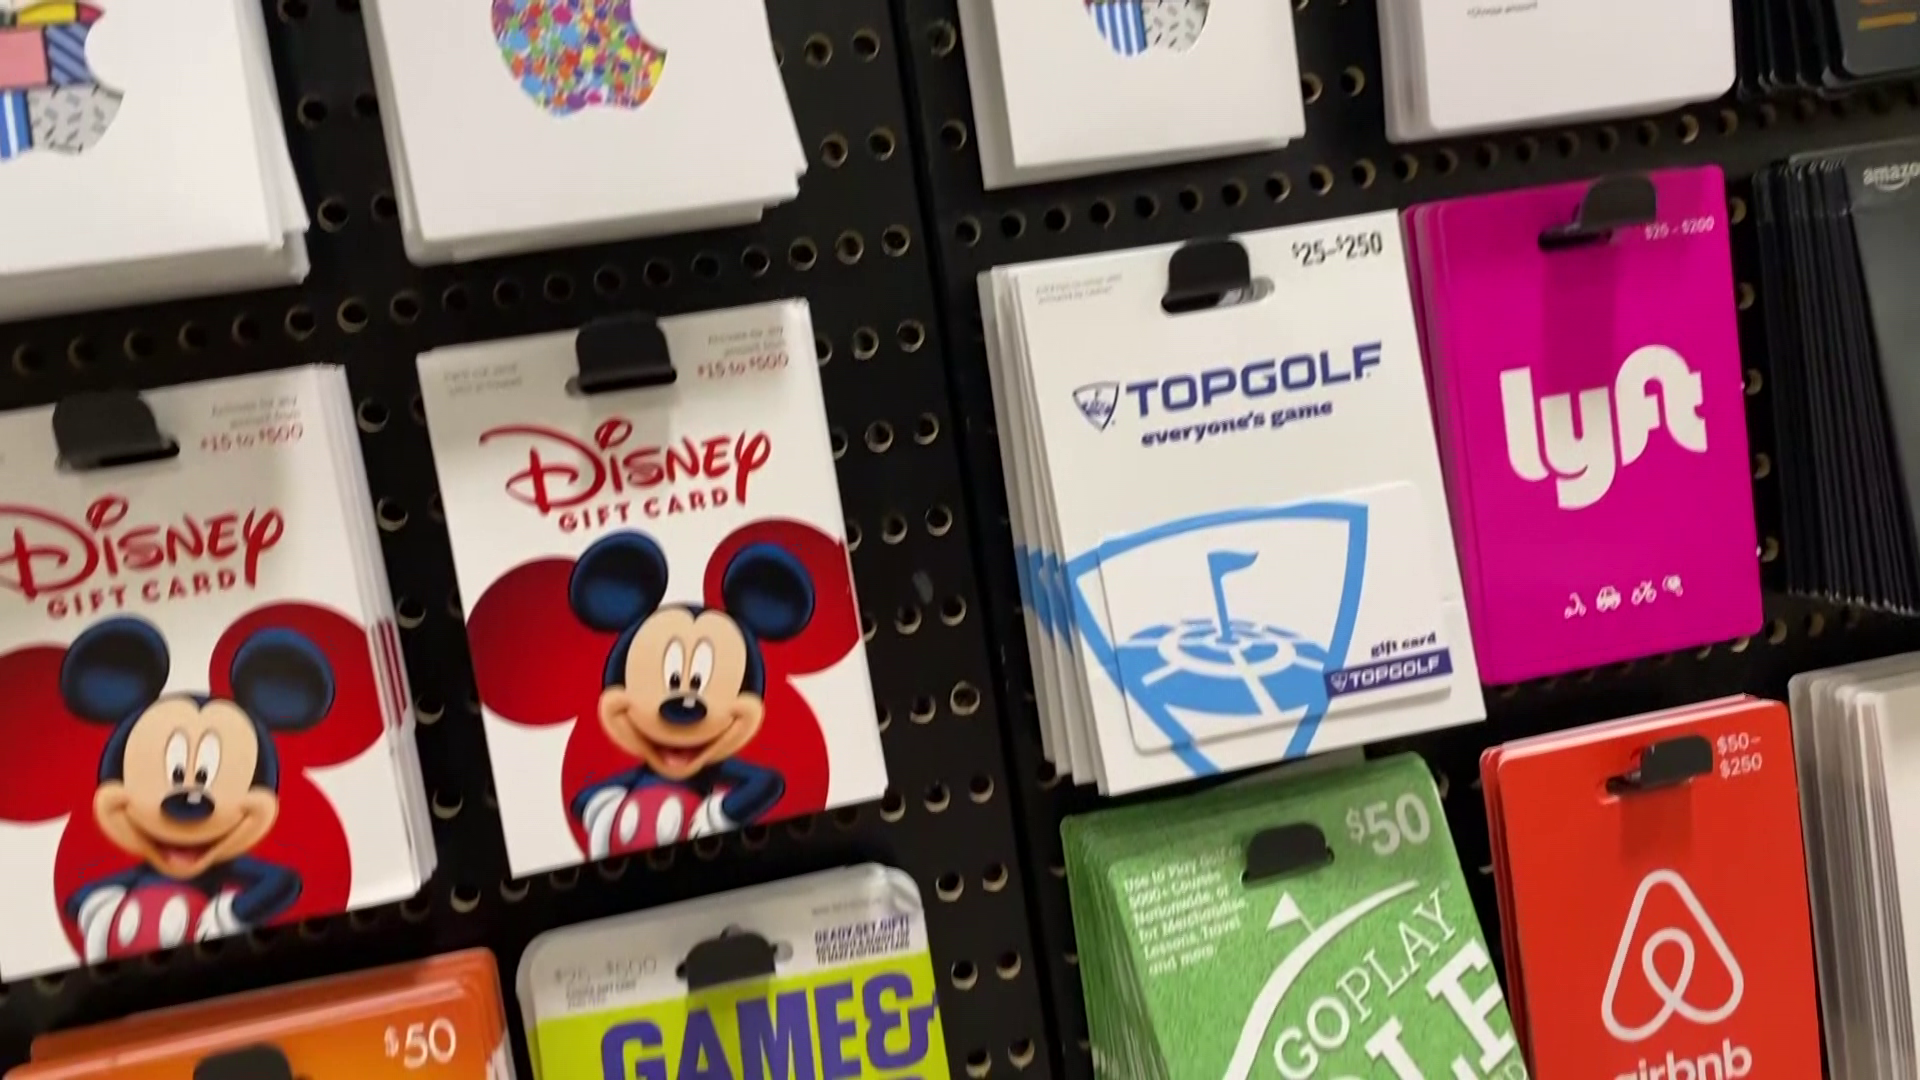 The Best and Absolute Worst Gift Cards To Buy for the Holidays